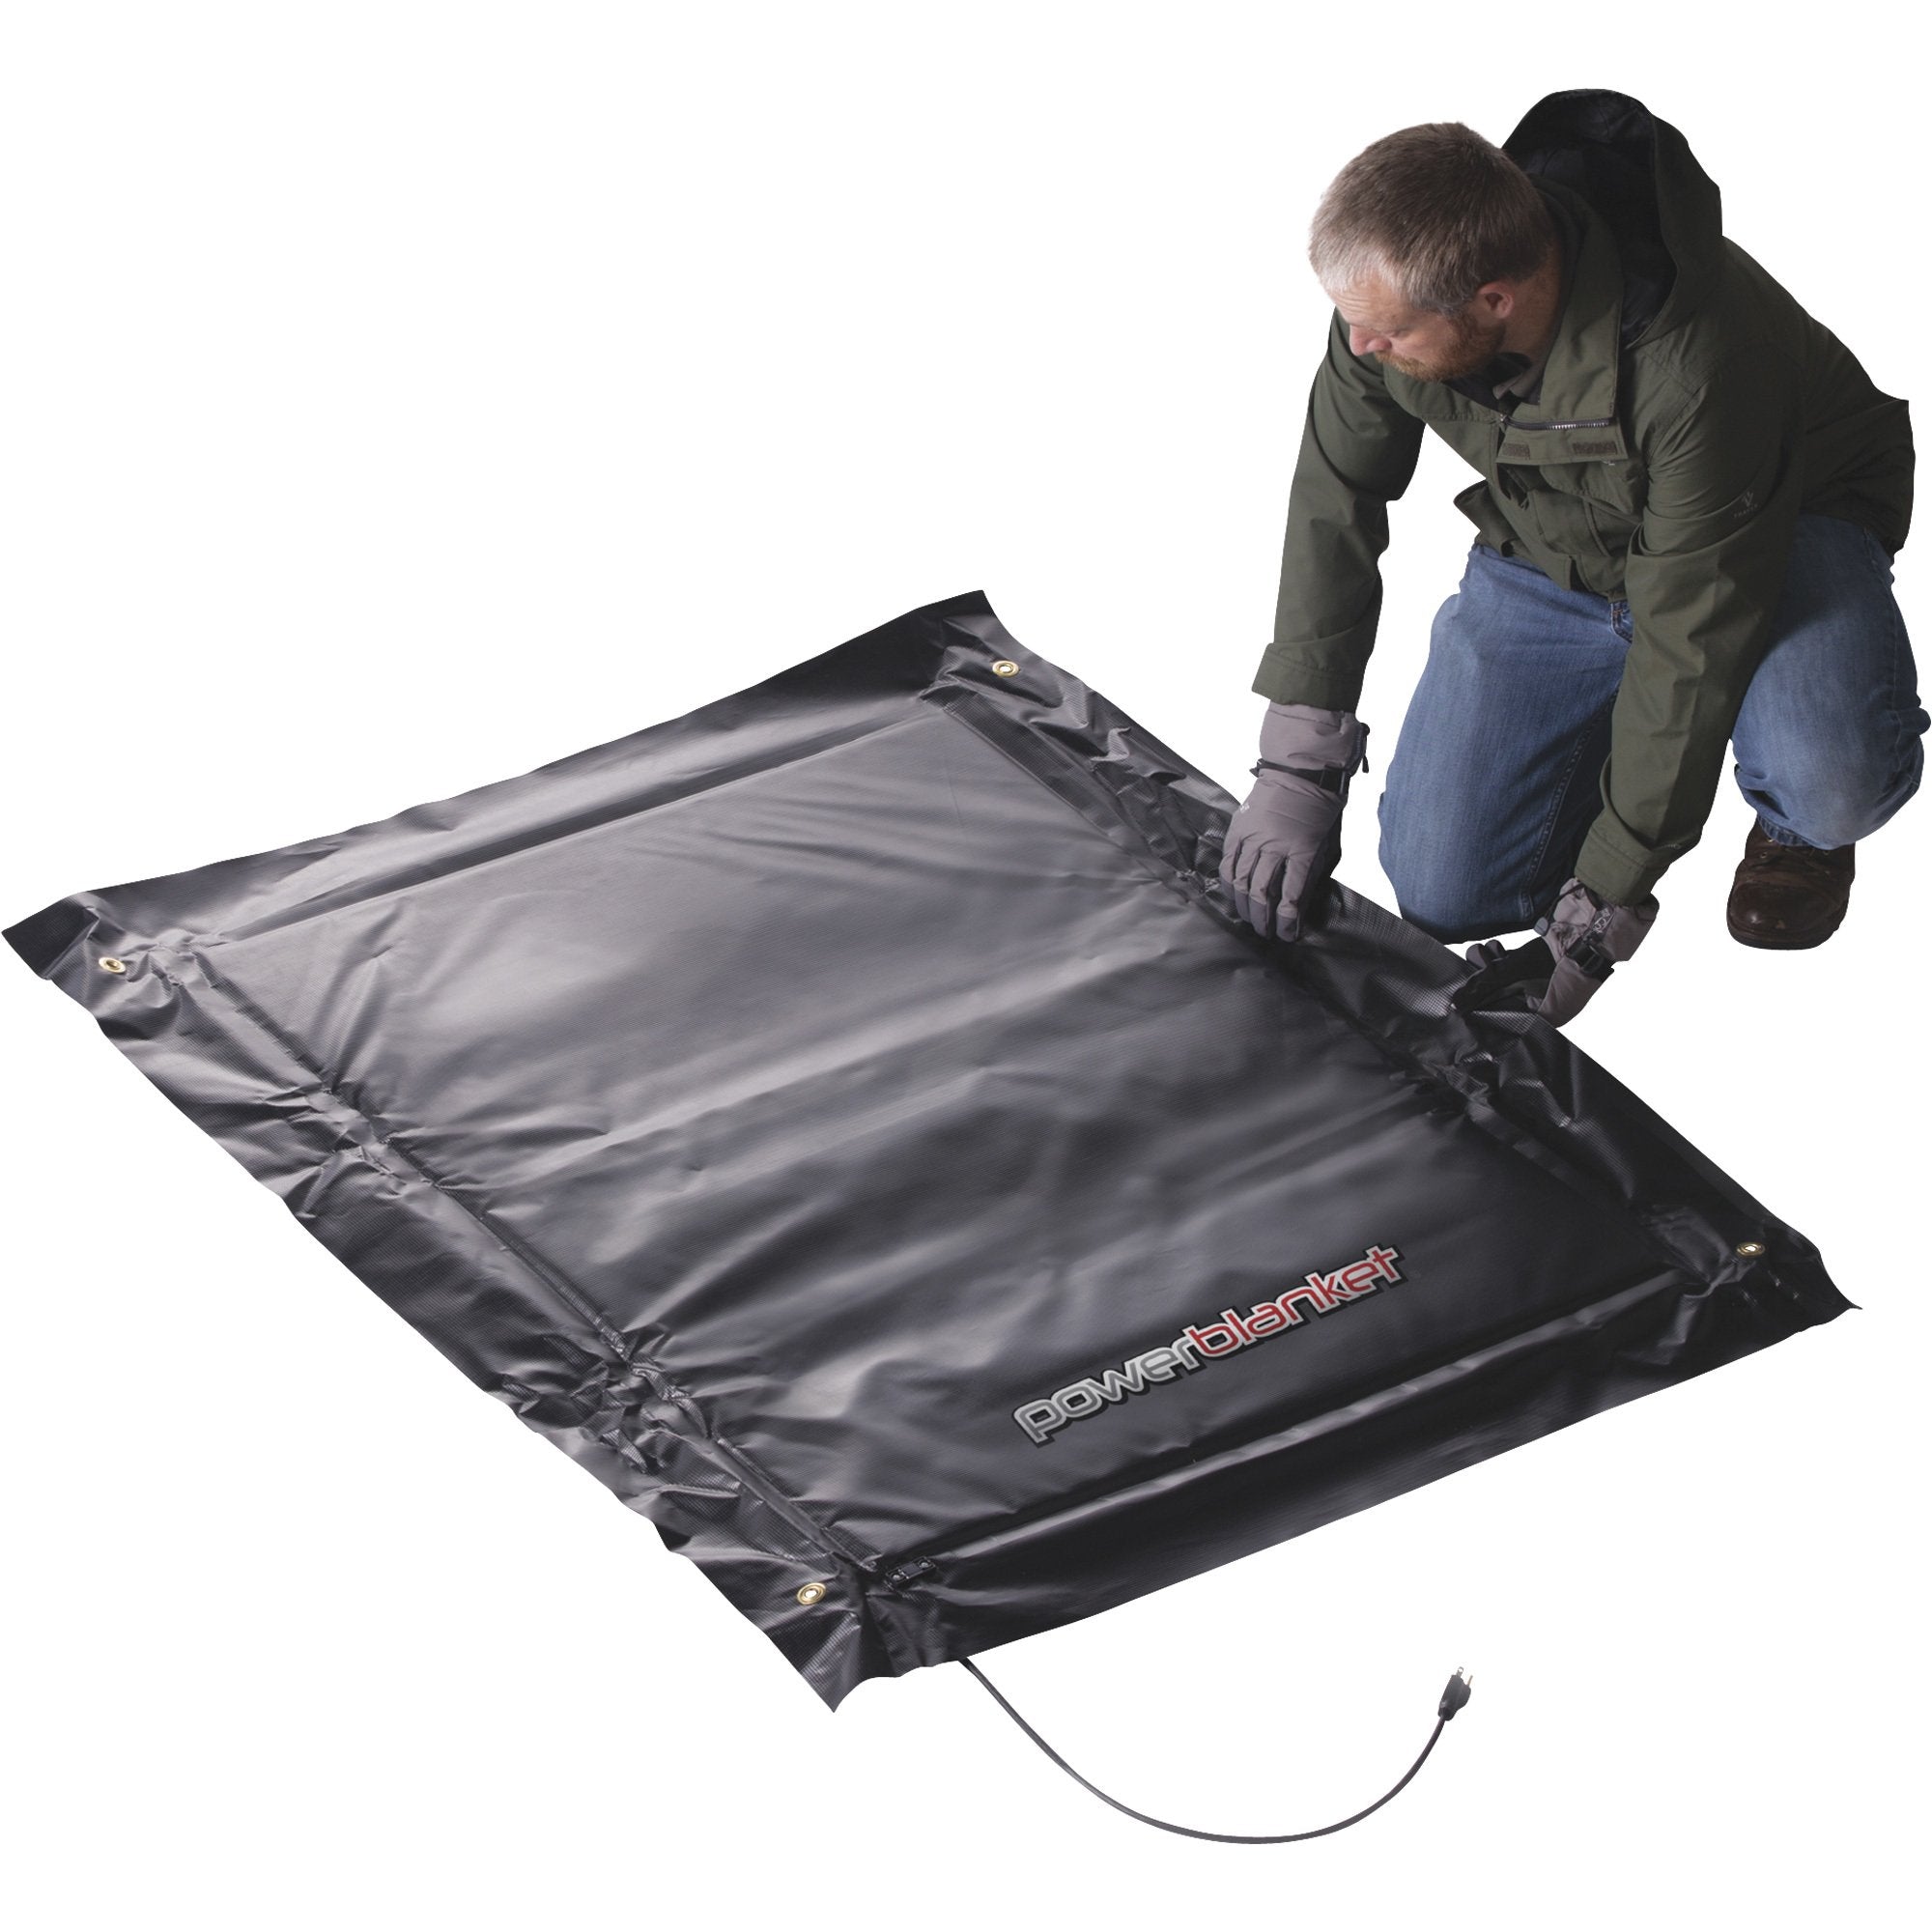 Powerblanket MD0304 4' x 3' Concrete Curing Blanket New